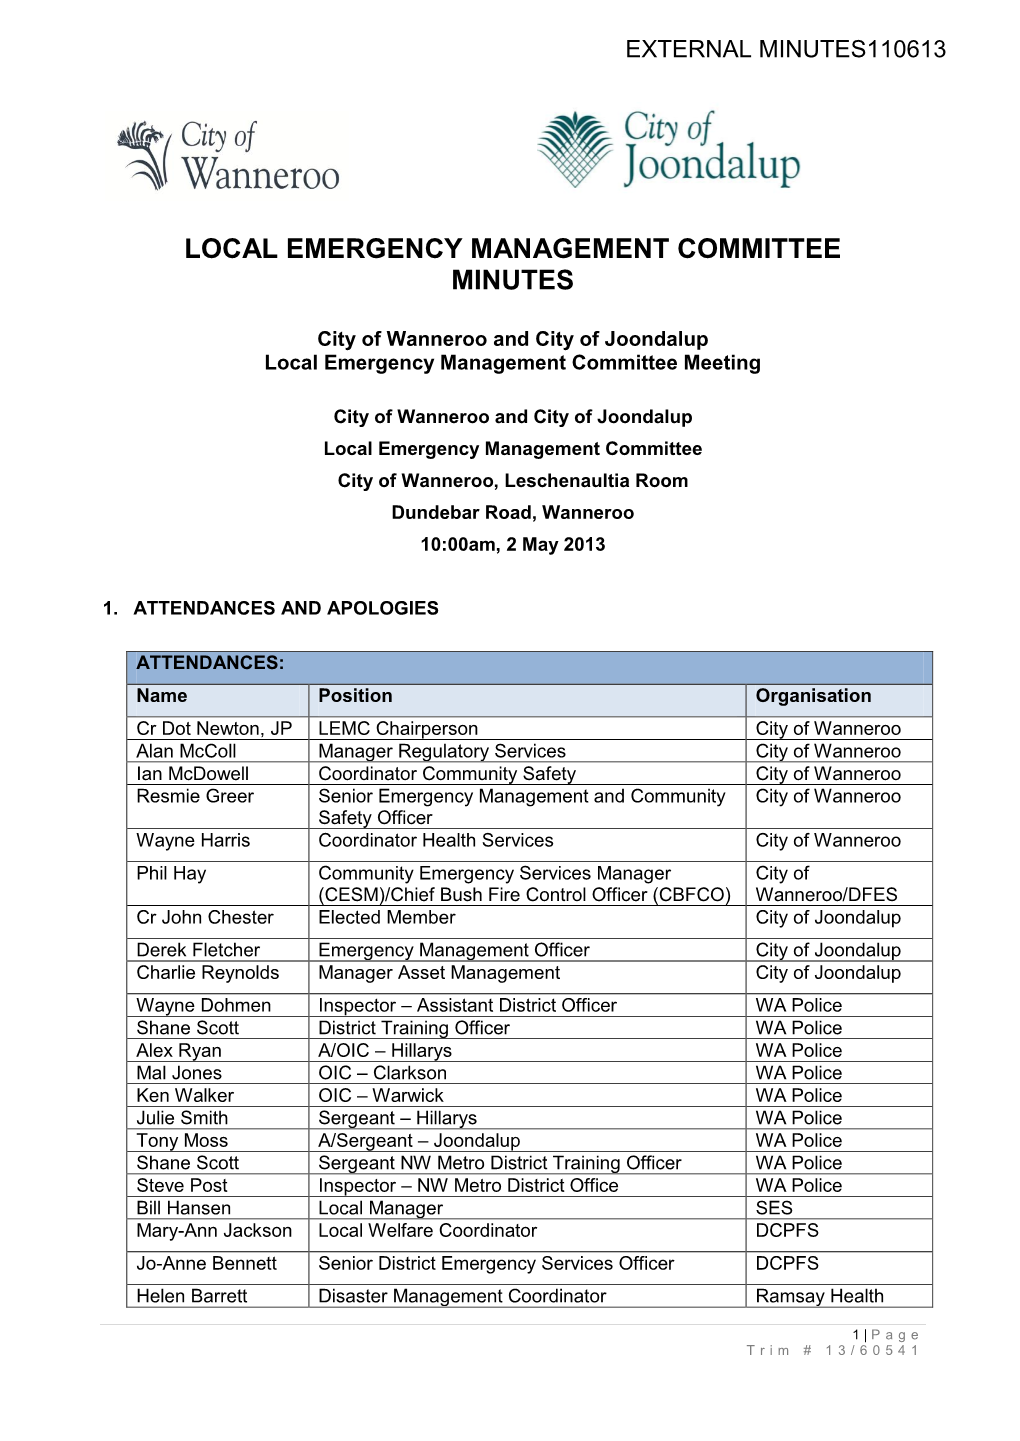 Local Emergency Management Committee Minutes